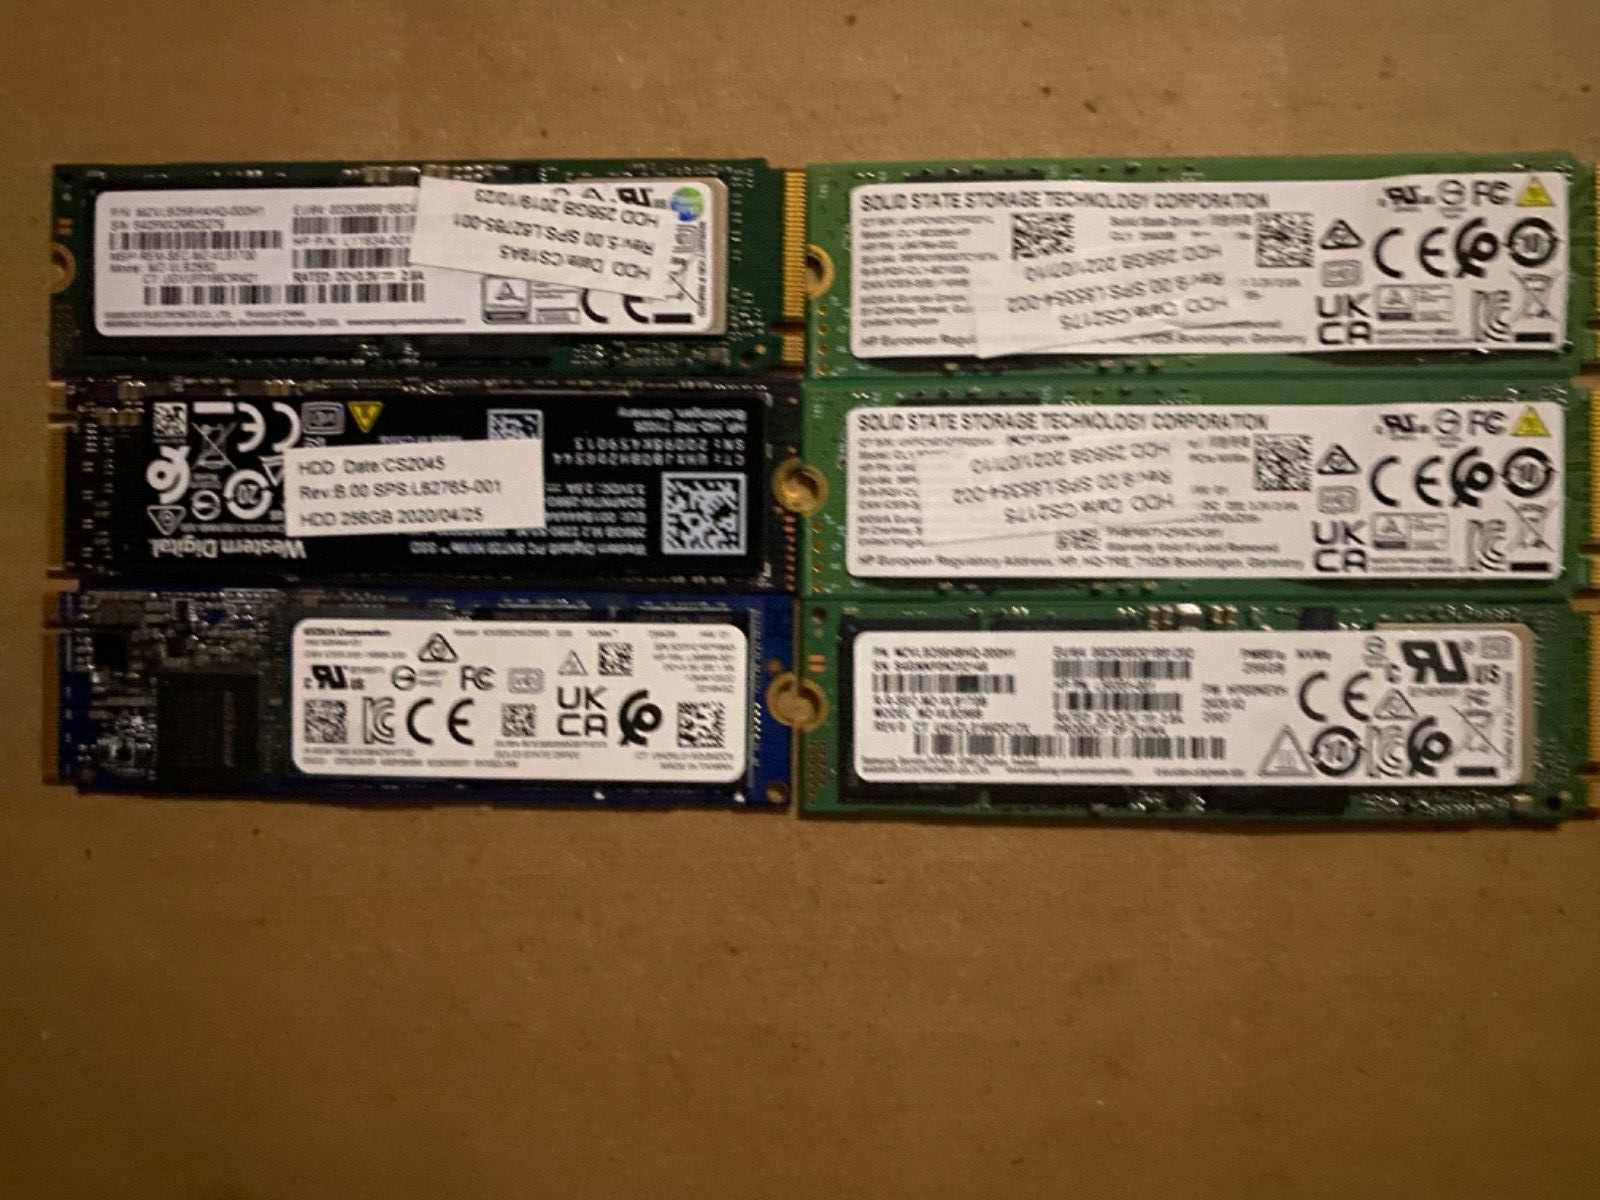 LOT of 6 Mixed Brand 256Gb PCIe NVMe SSD M.2 